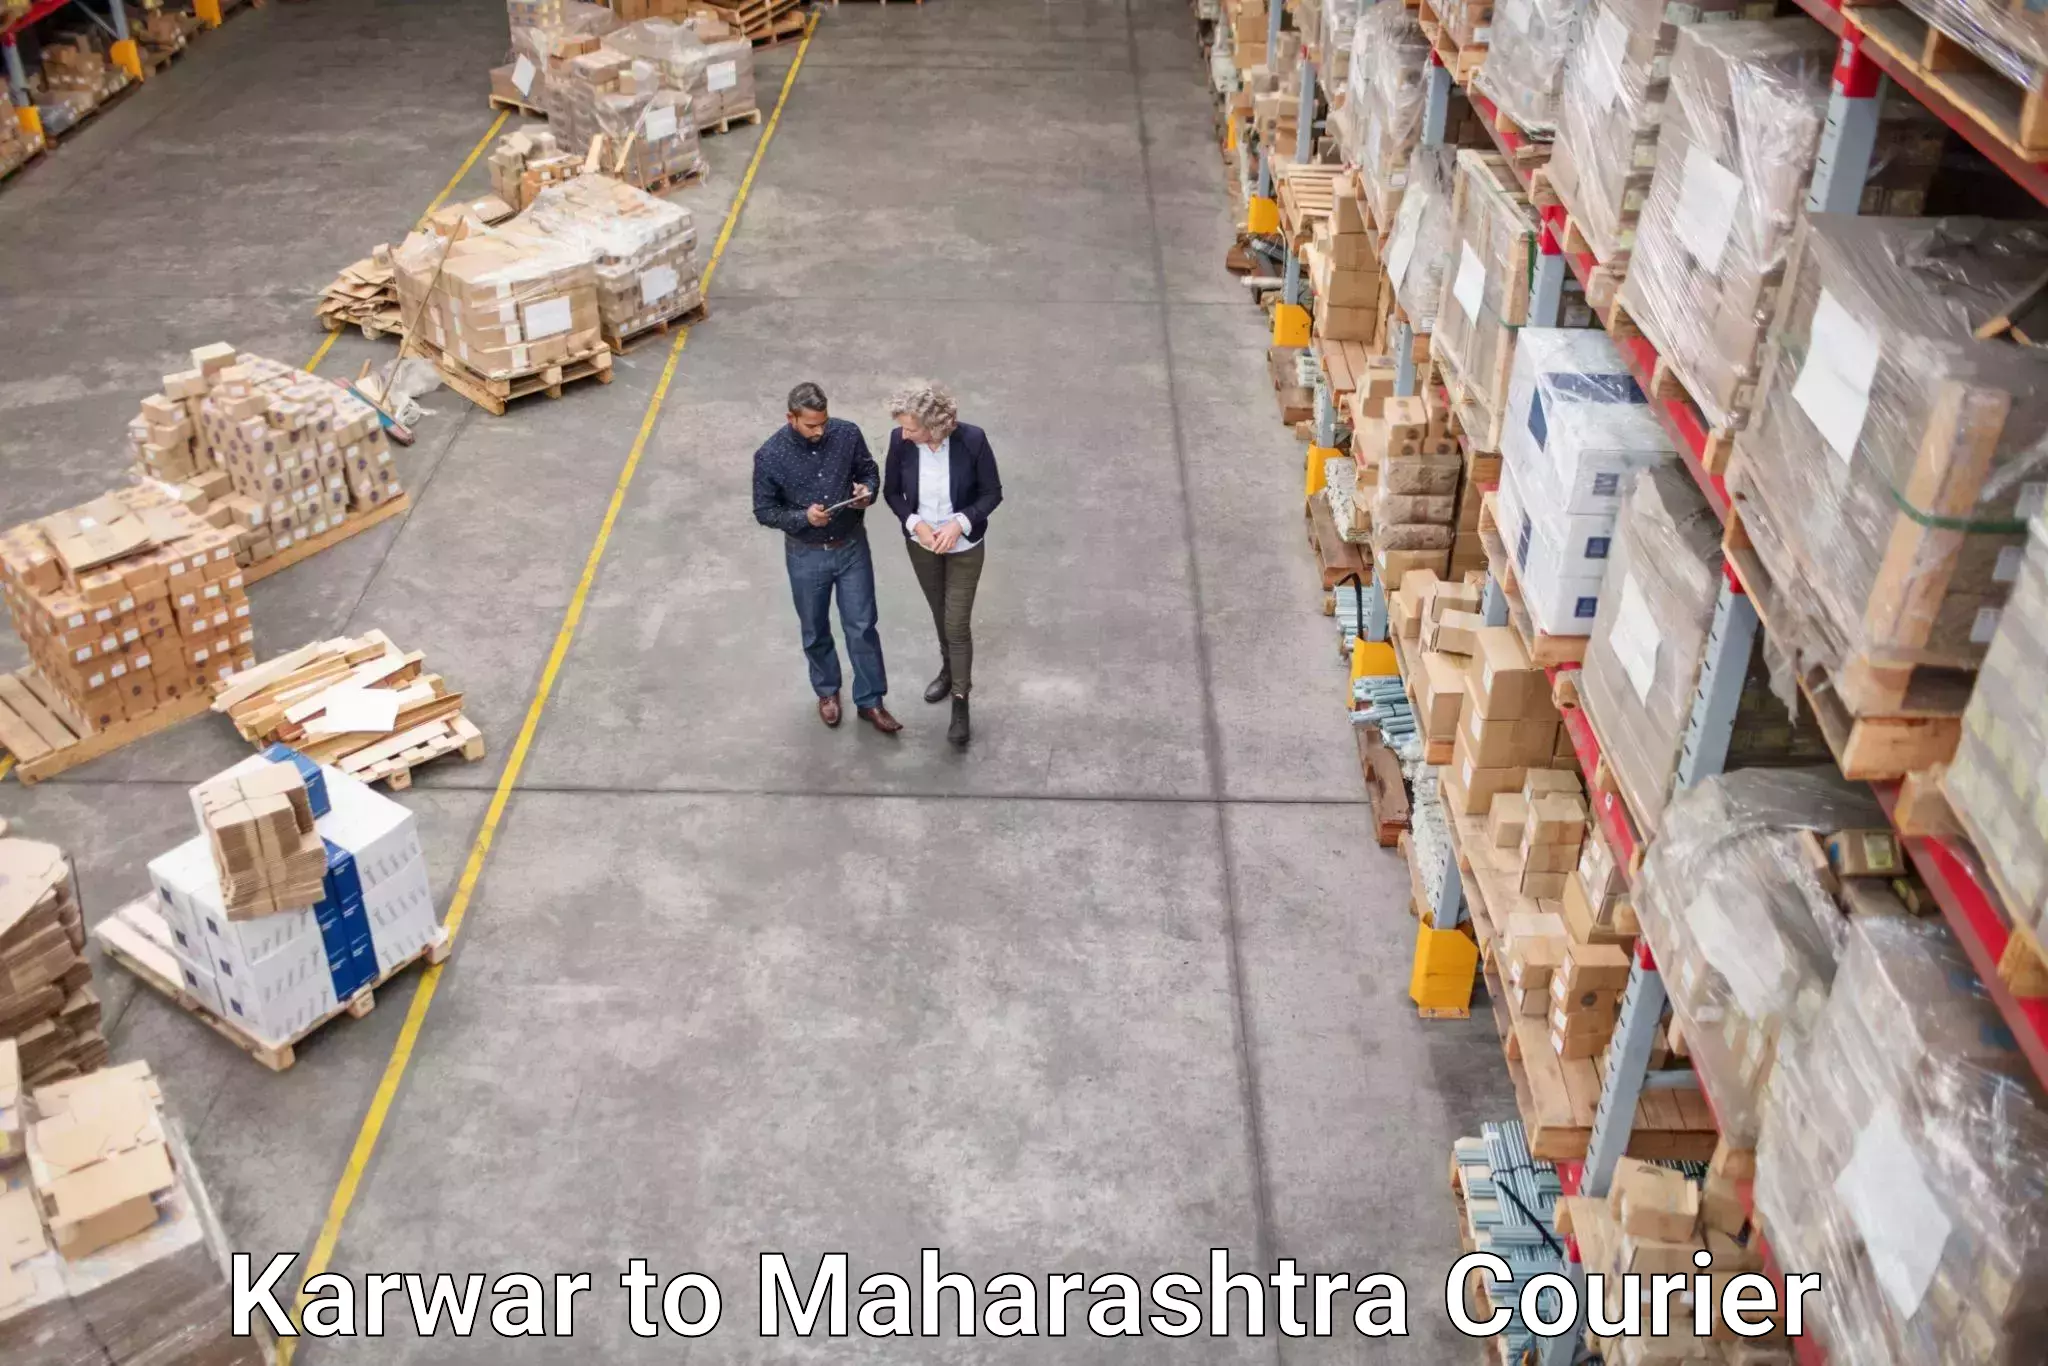 Secure package delivery in Karwar to Maharashtra